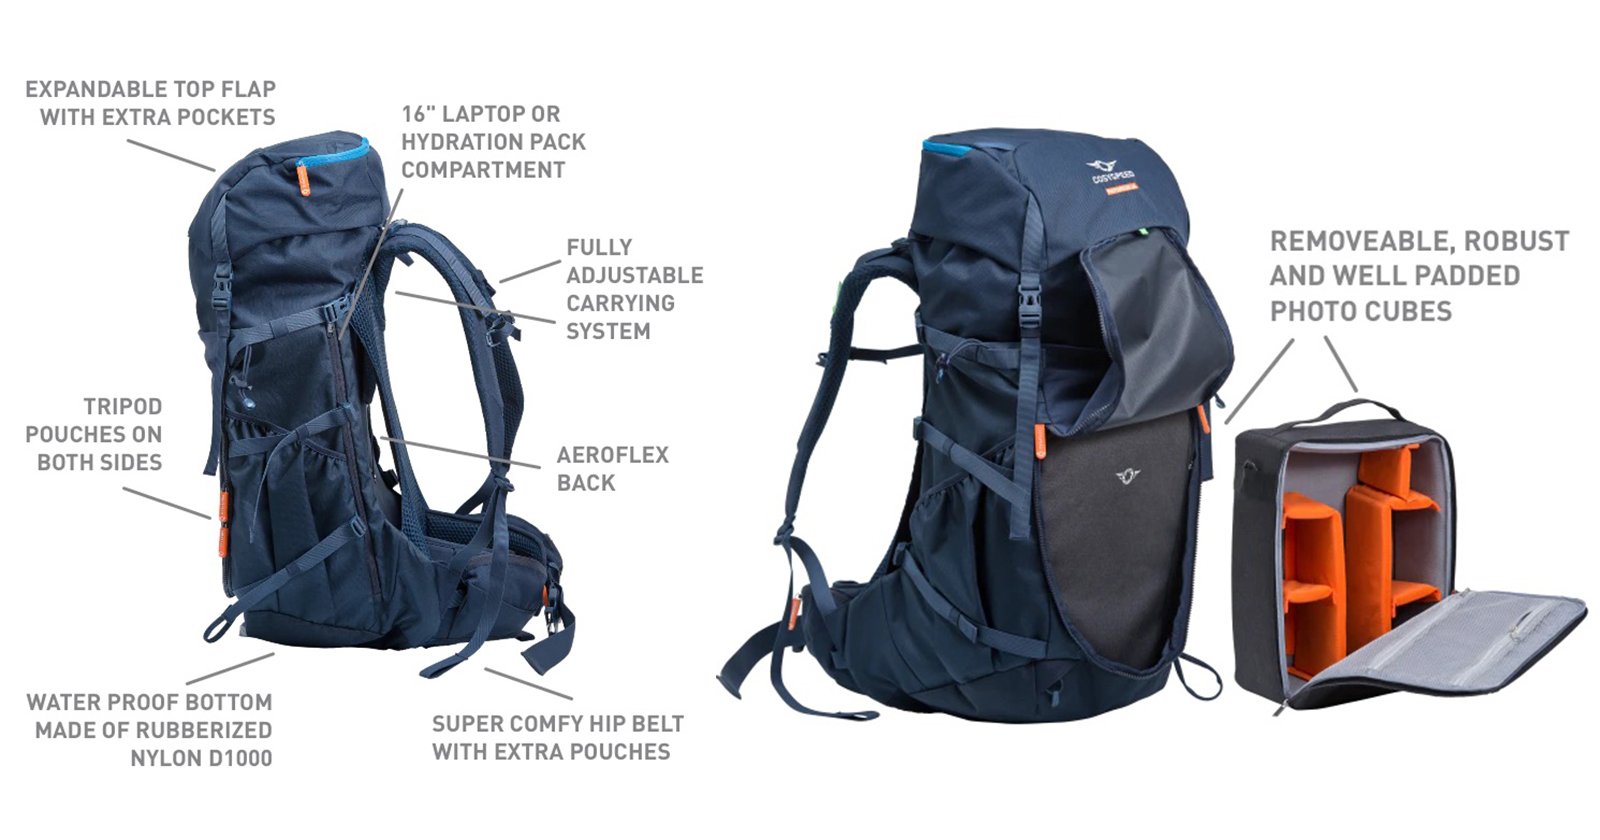 The PhotoHiker is a Camera Backpack Built for Adventurers